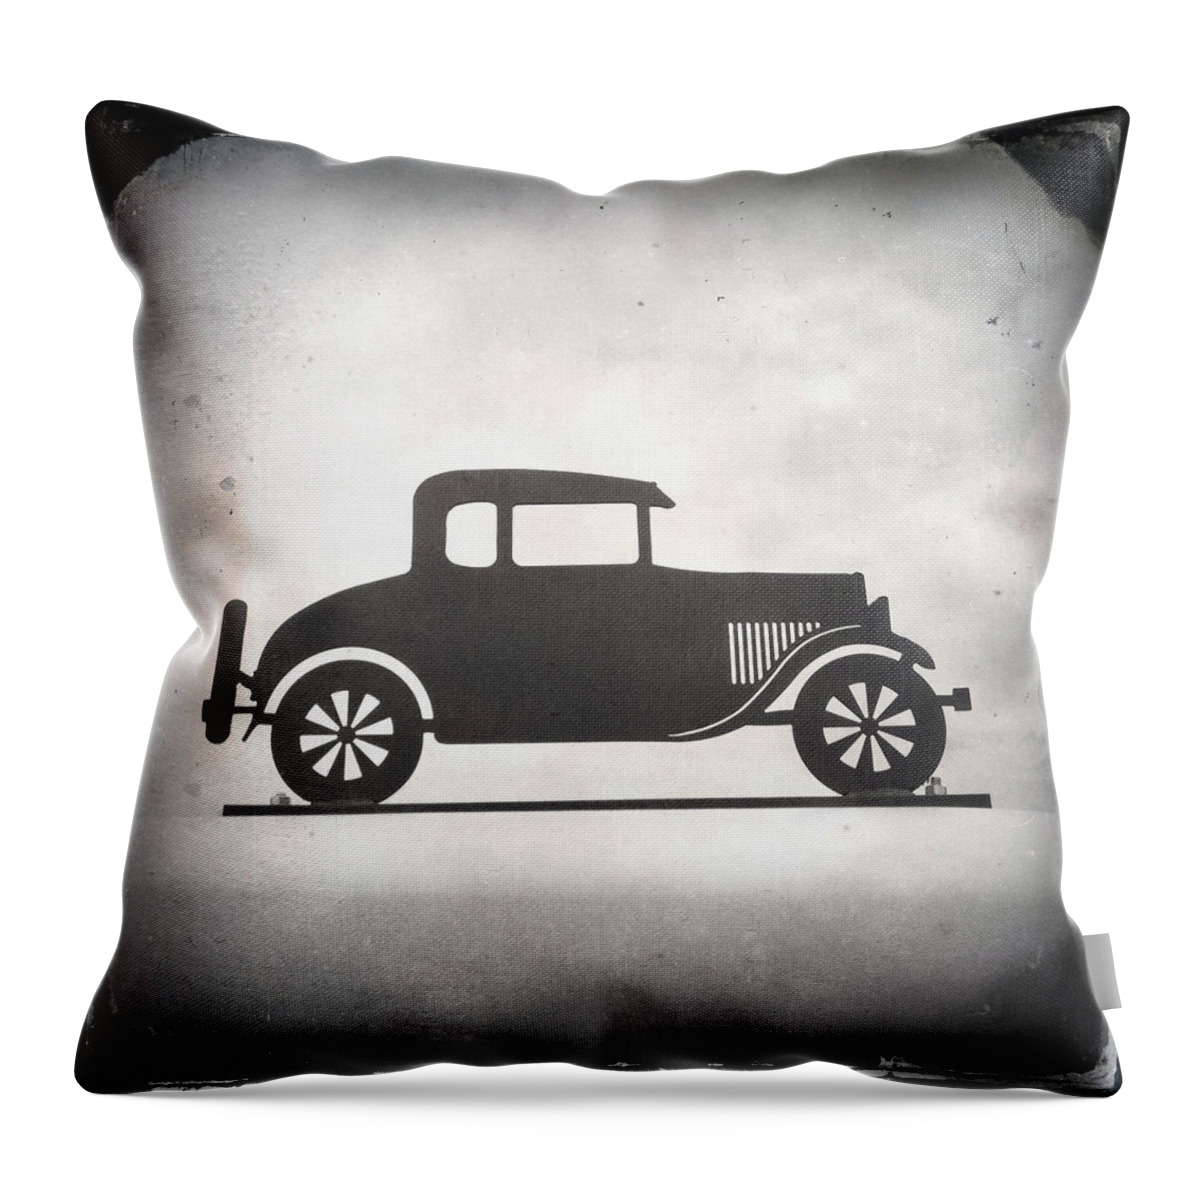 Vintage Car Throw Pillow featuring the photograph Olden Vroom by Natasha Marco